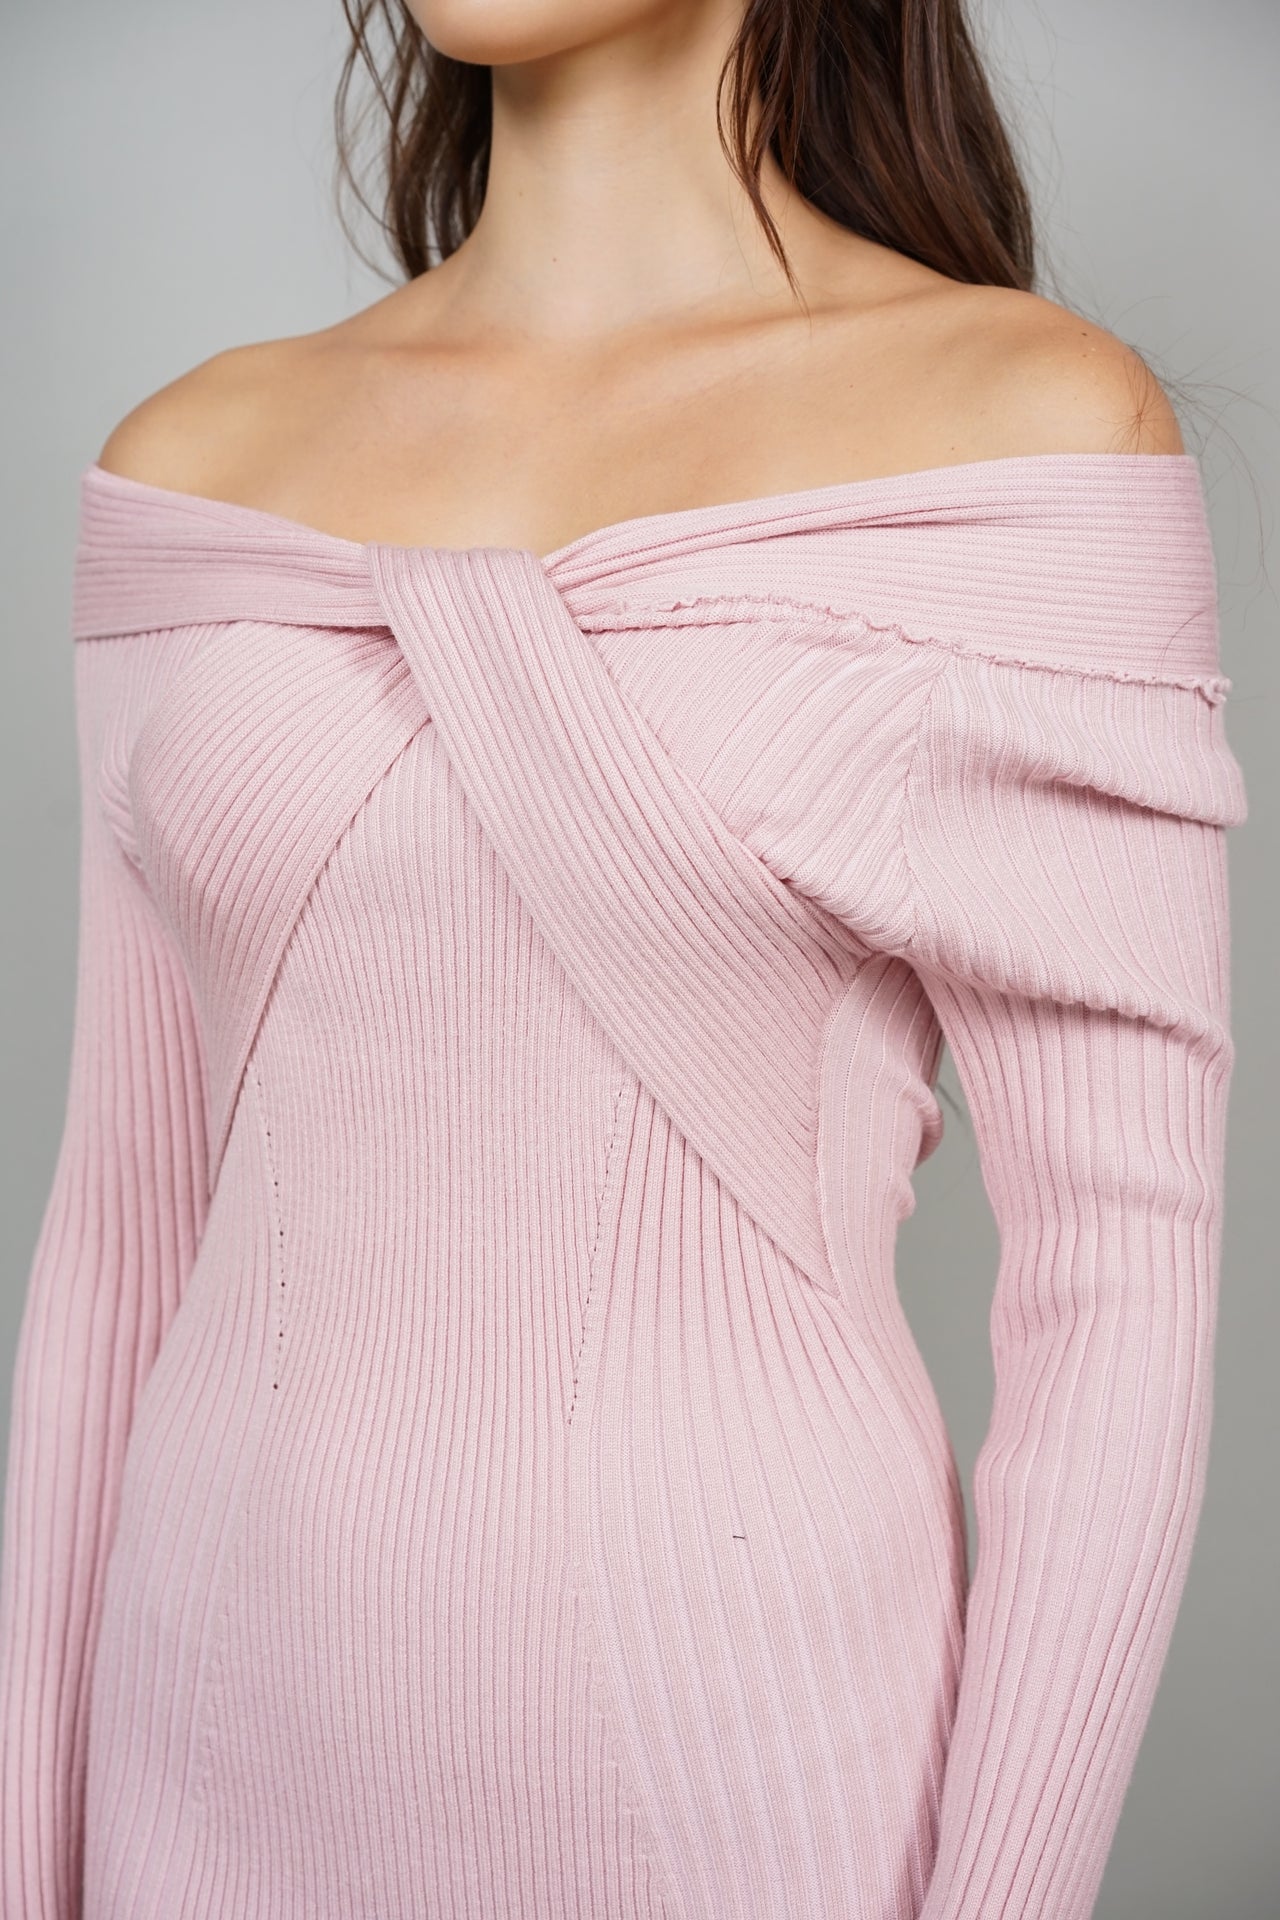 EVERYDAY / Ellie Knit Dress in Pink